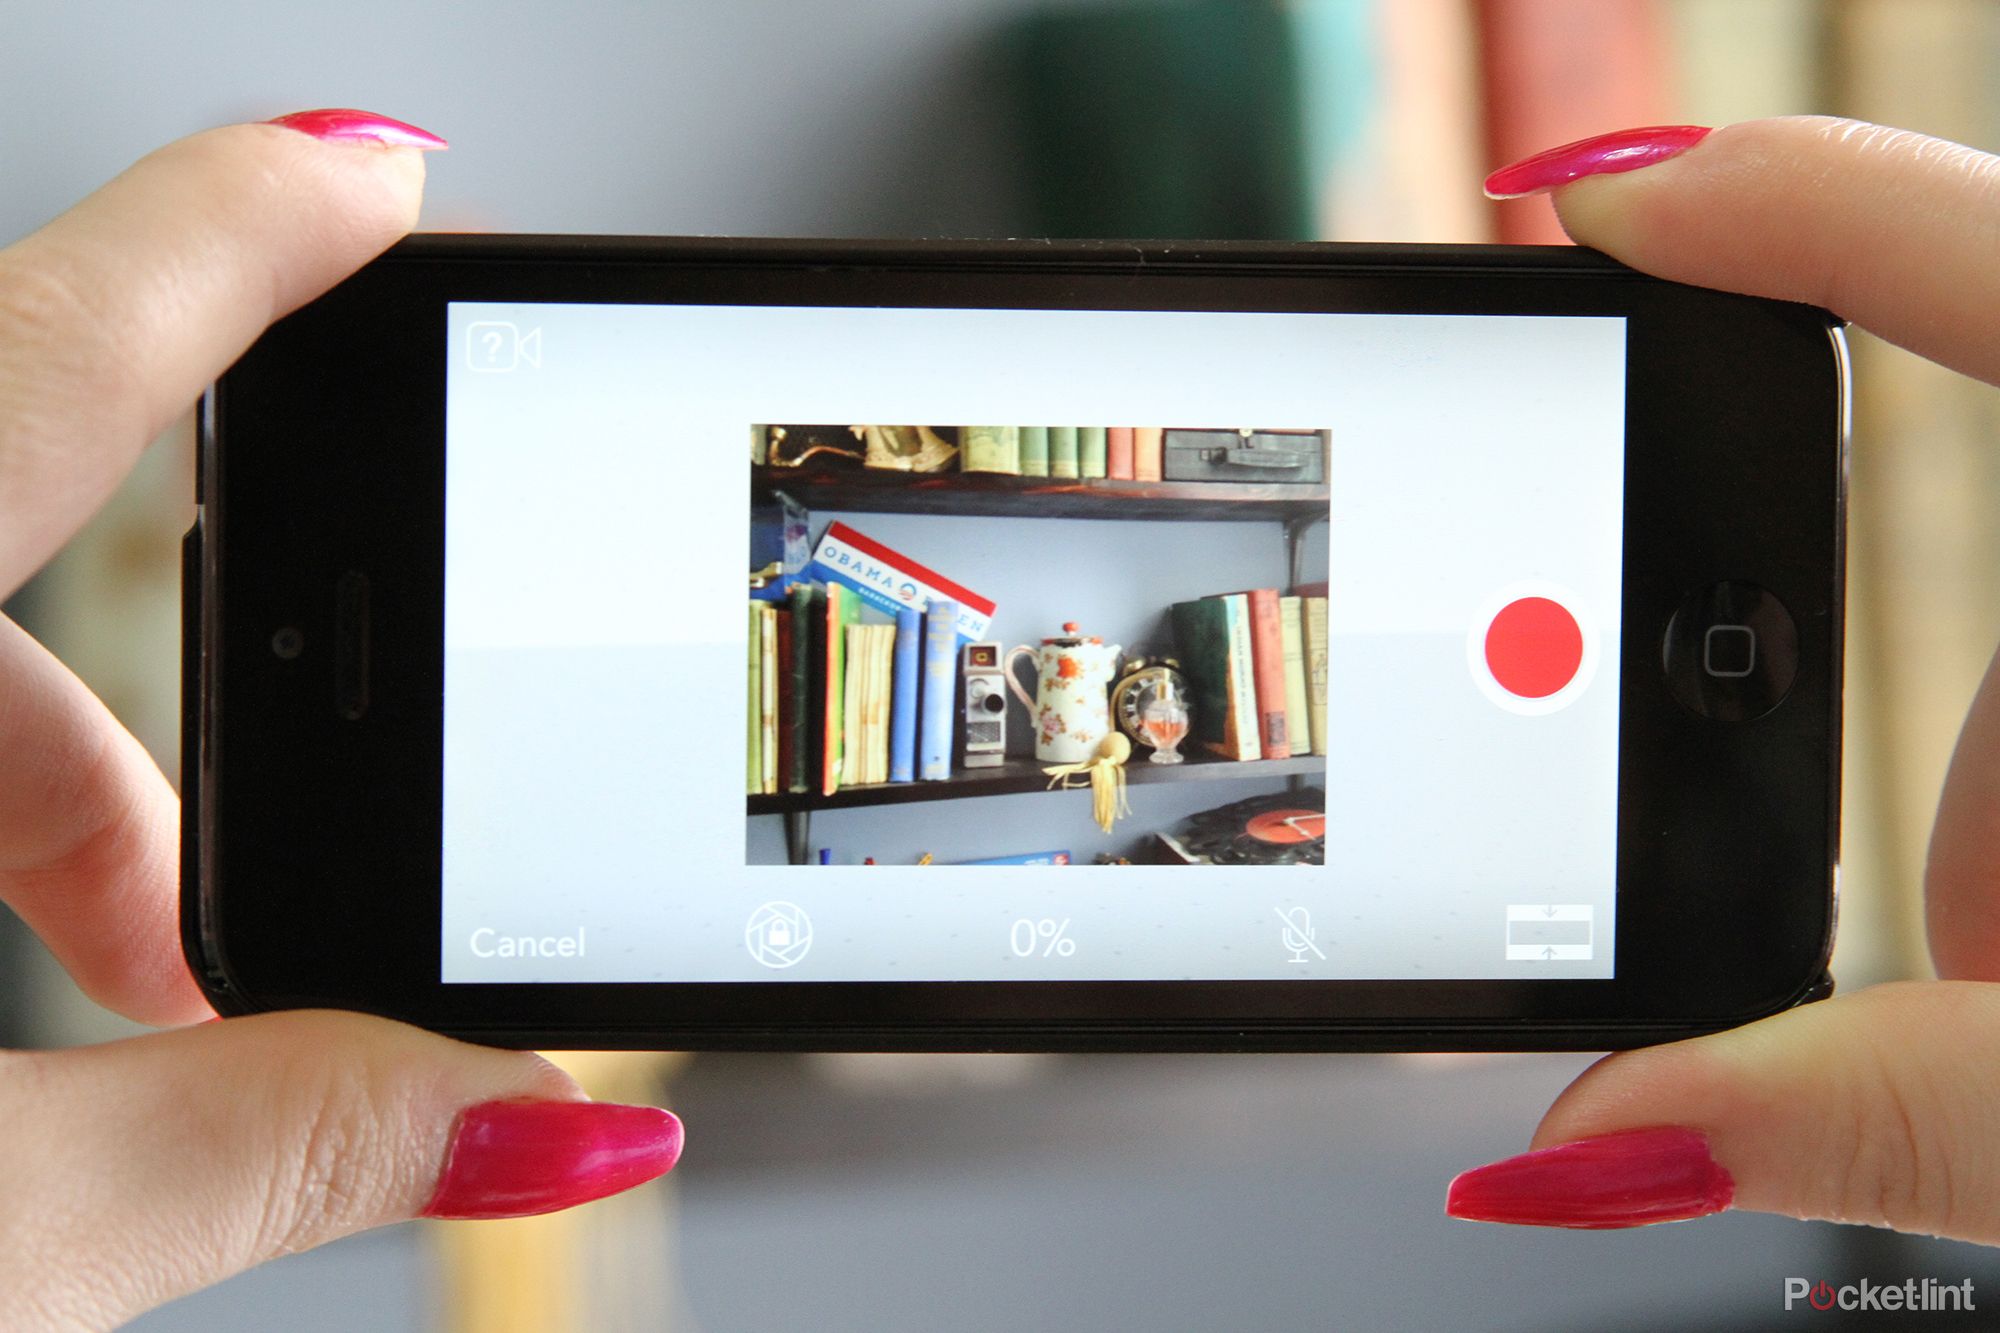 bubbli ios app lets you create and share a spherical photo bubble with sound image 1